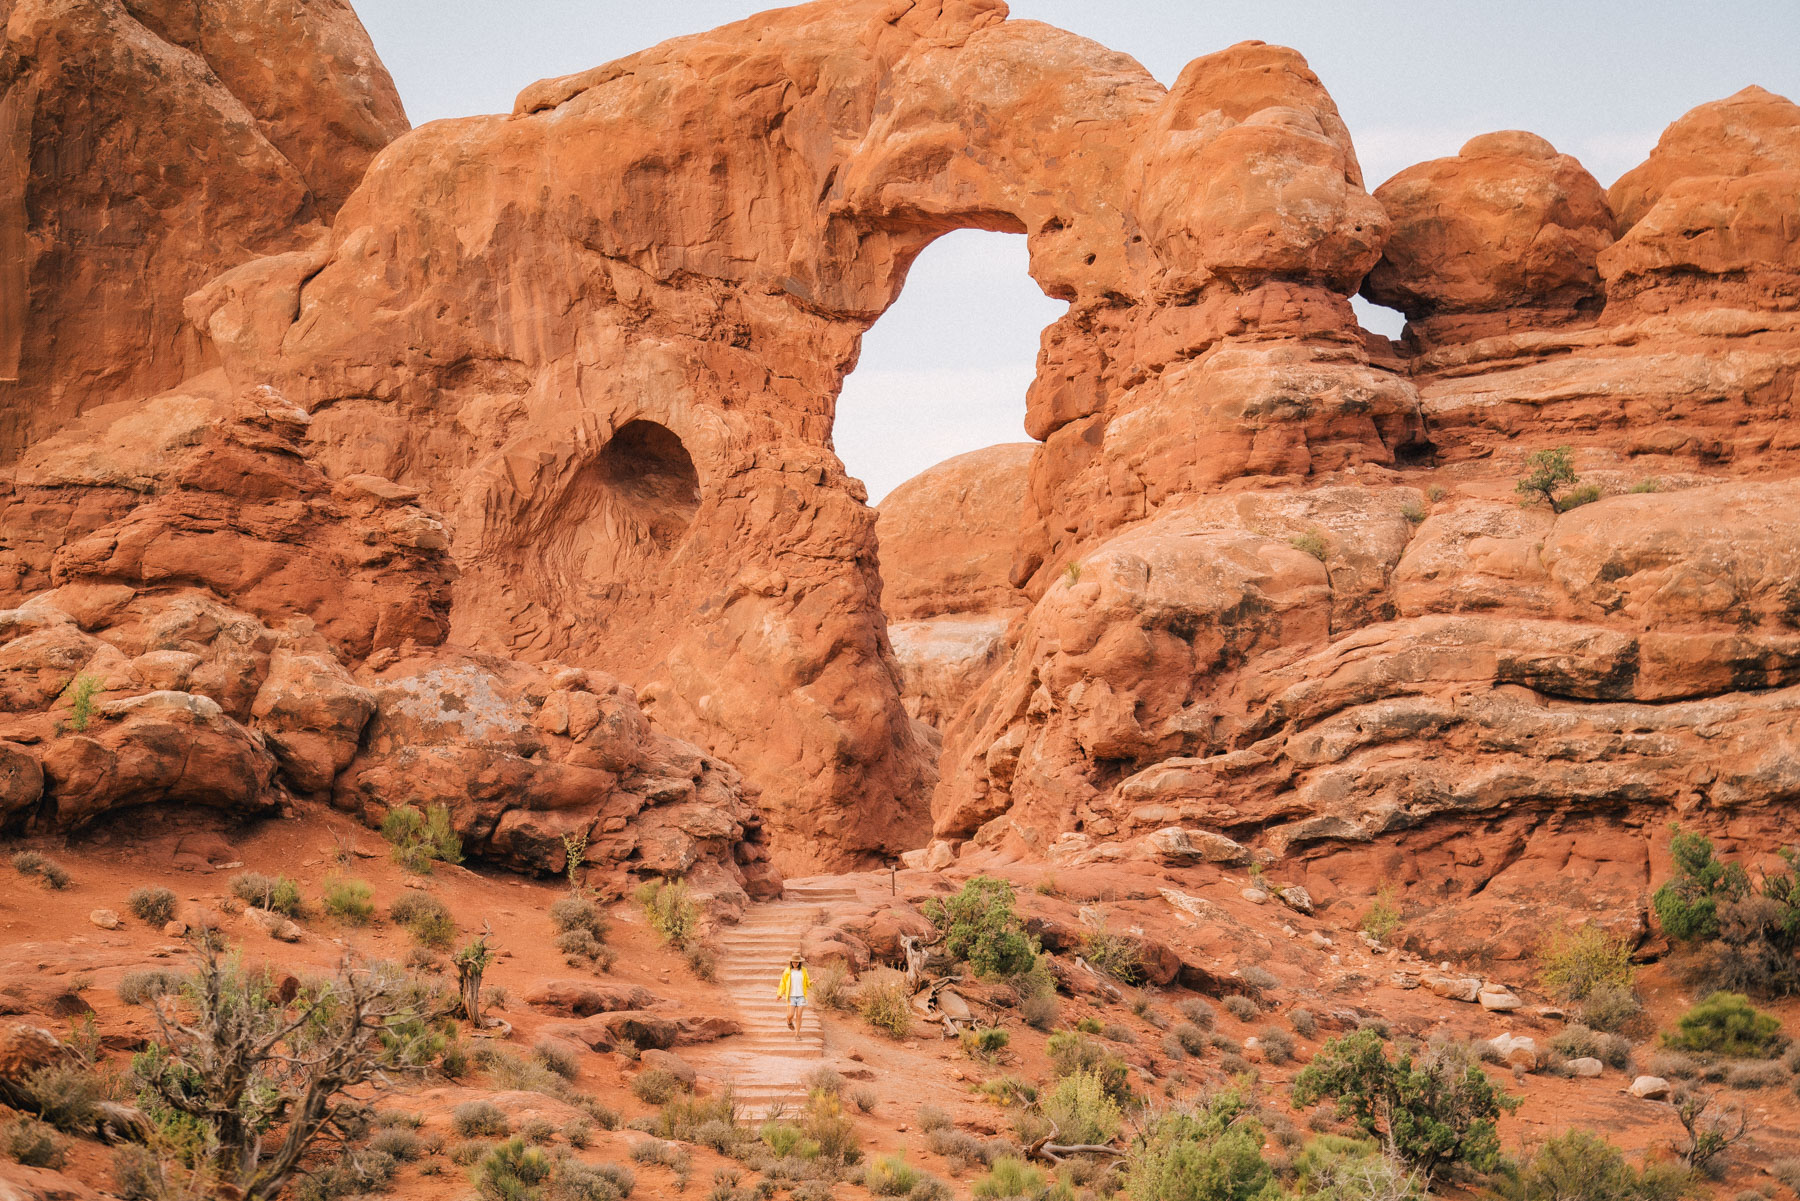 Turret Arch Arches National Park
best hikes Arches National Park